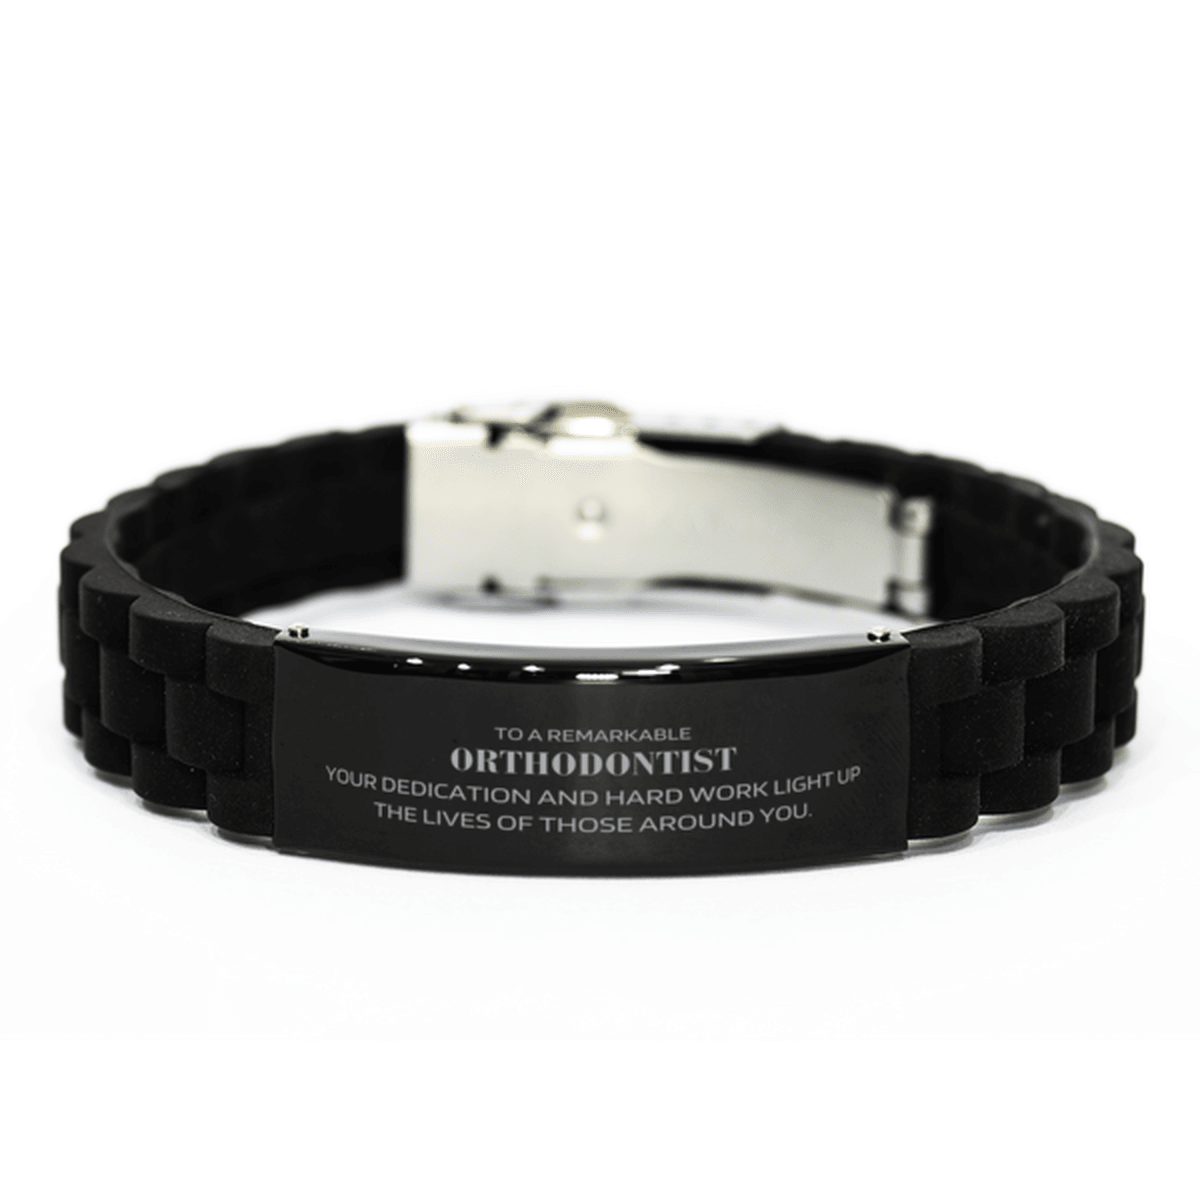 Remarkable Orthodontist Gifts, Your dedication and hard work, Inspirational Birthday Christmas Unique Black Glidelock Clasp Bracelet For Orthodontist, Coworkers, Men, Women, Friends - Mallard Moon Gift Shop